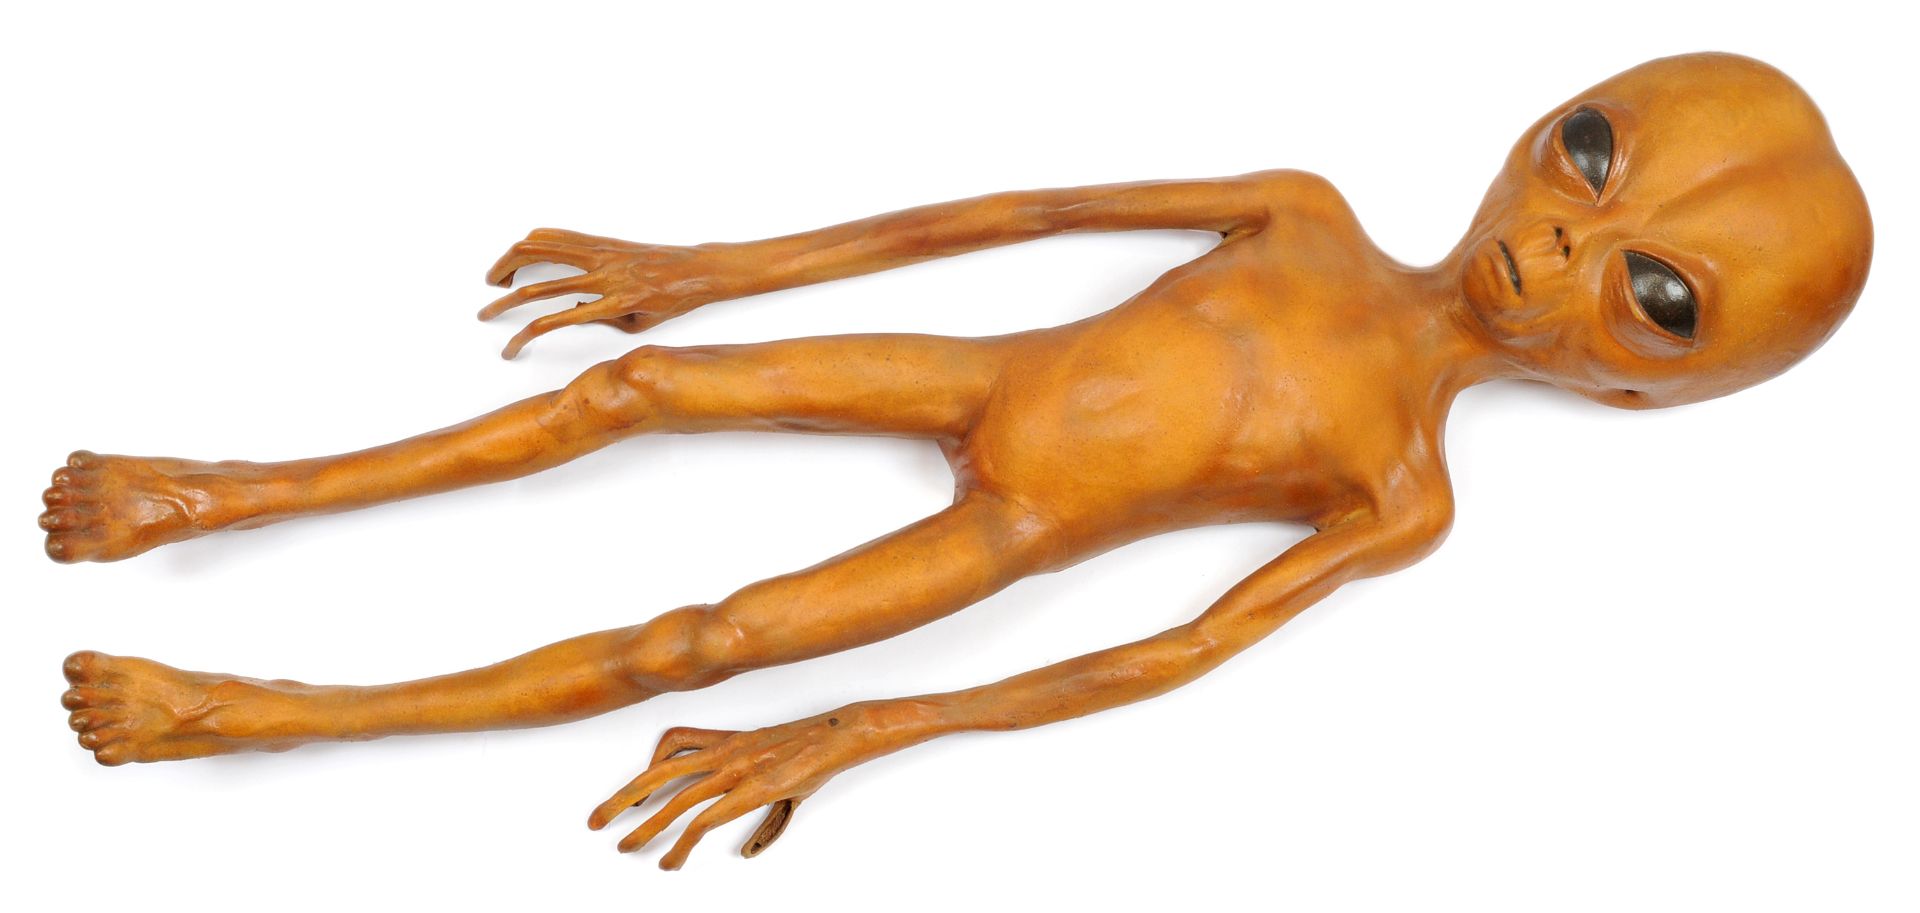 Life Size Alien Prop Used in The X-Files 1993 to 2016